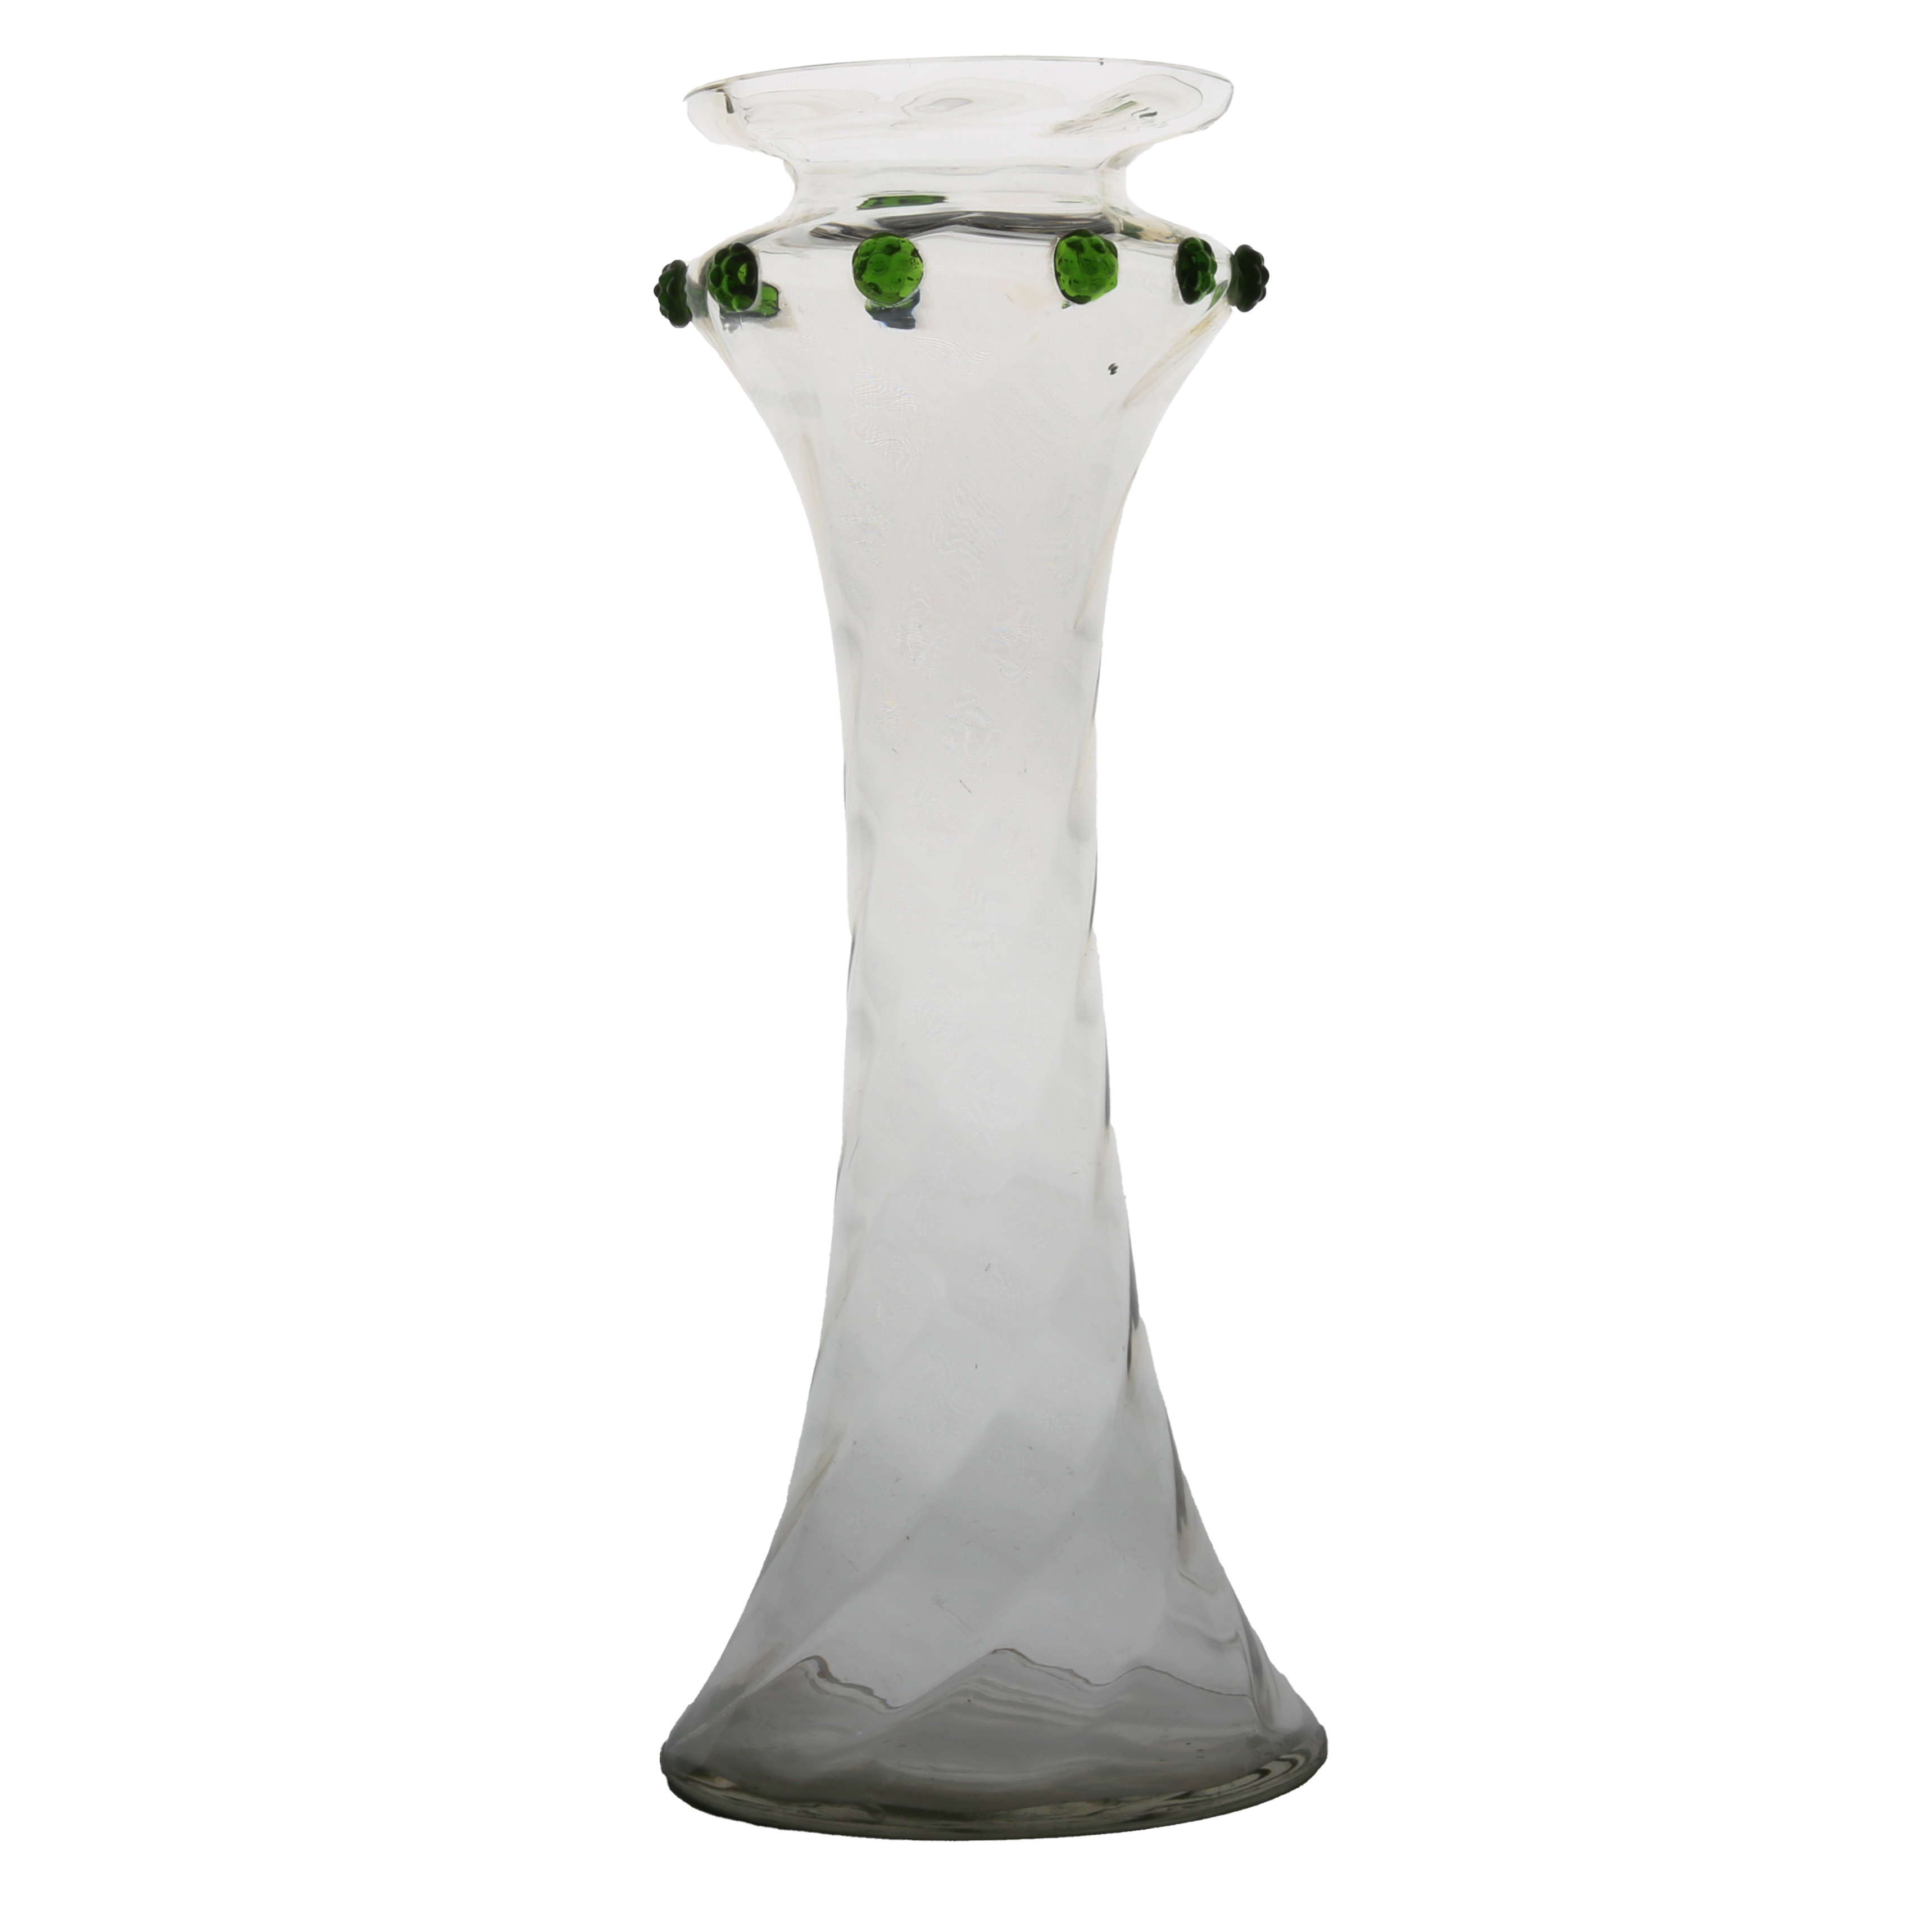 An early 20th Century Bohemian glass vase, circa 1900, possibly by Fritz Heckert, with spiral